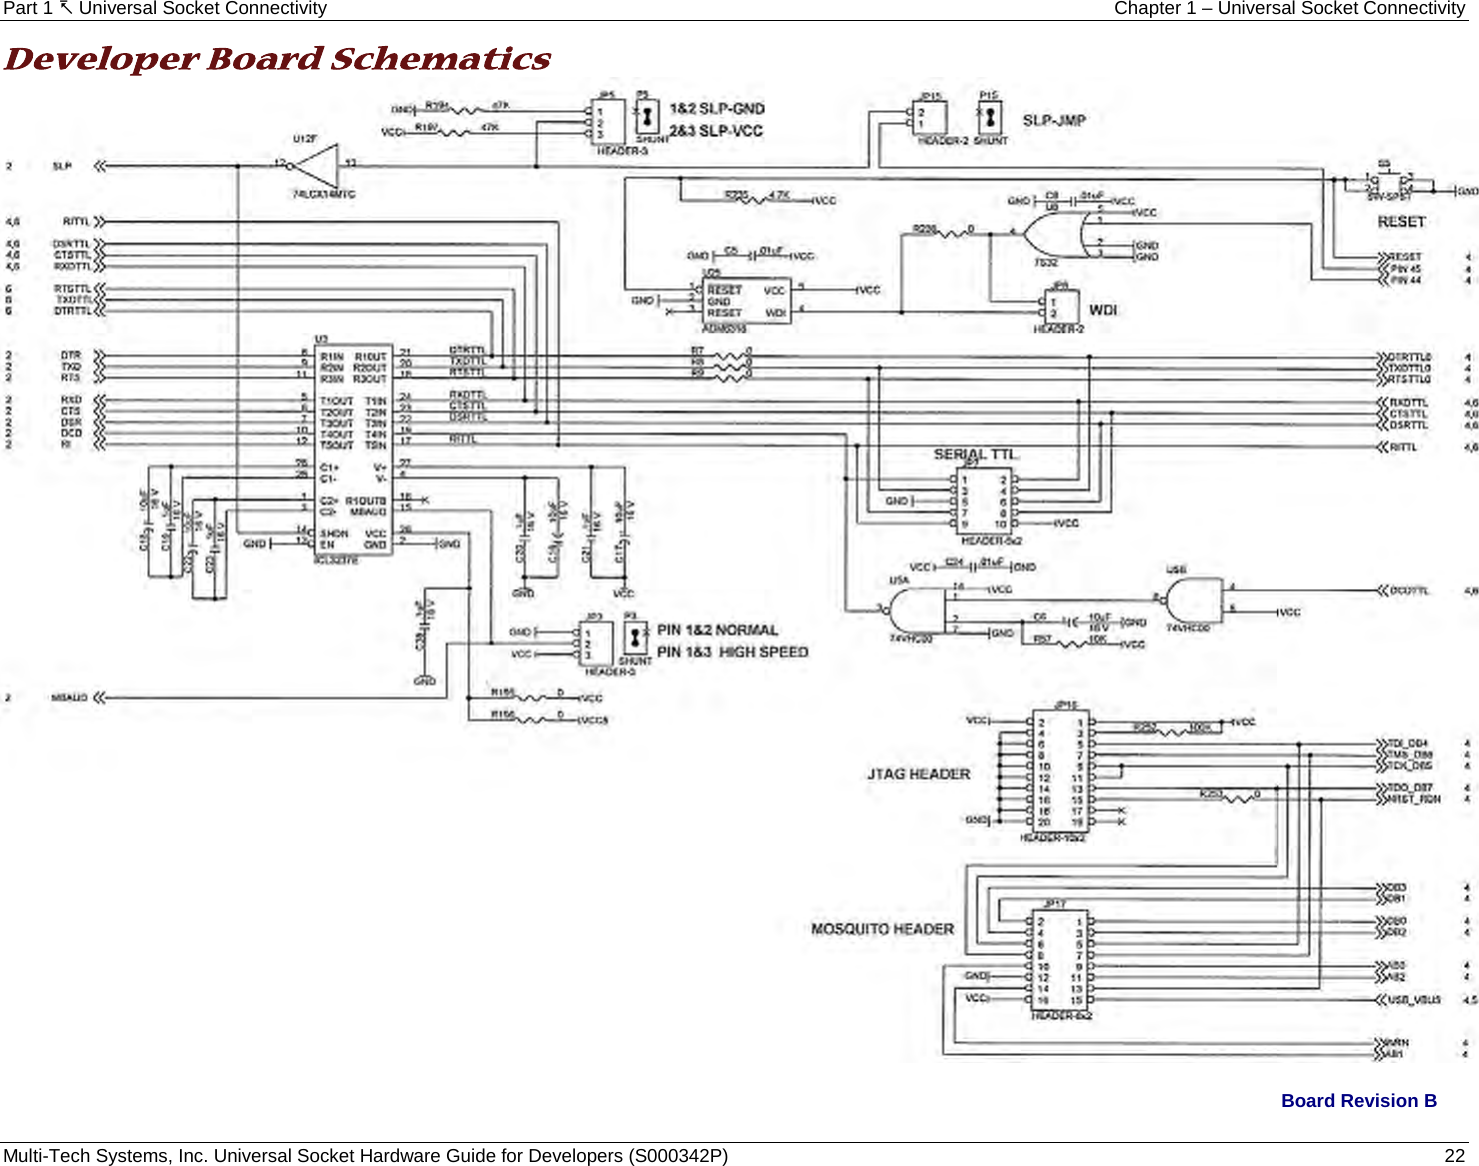 Part 1  Universal Socket Connectivity Chapter 1 – Universal Socket Connectivity Multi-Tech Systems, Inc. Universal Socket Hardware Guide for Developers (S000342P)  22  Developer Board Schematics   Board Revision B    